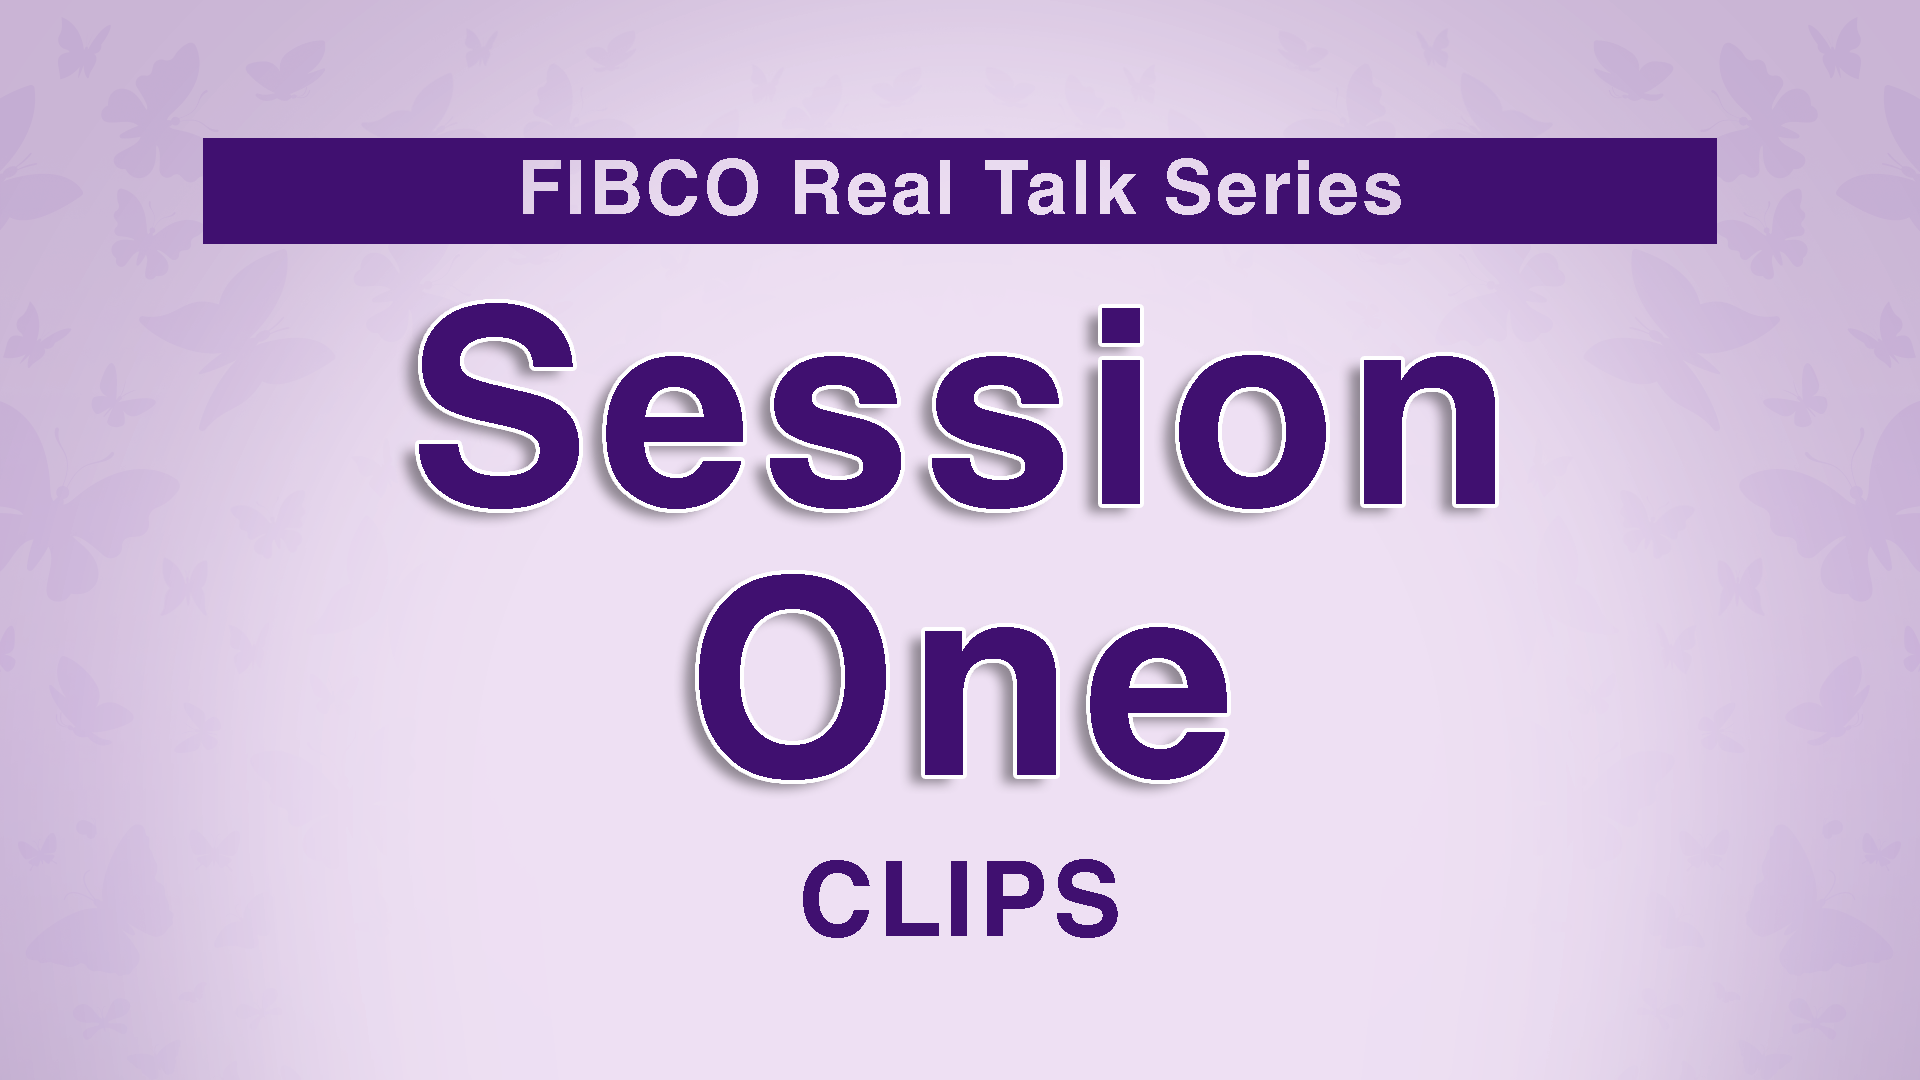 Session 1 Clips